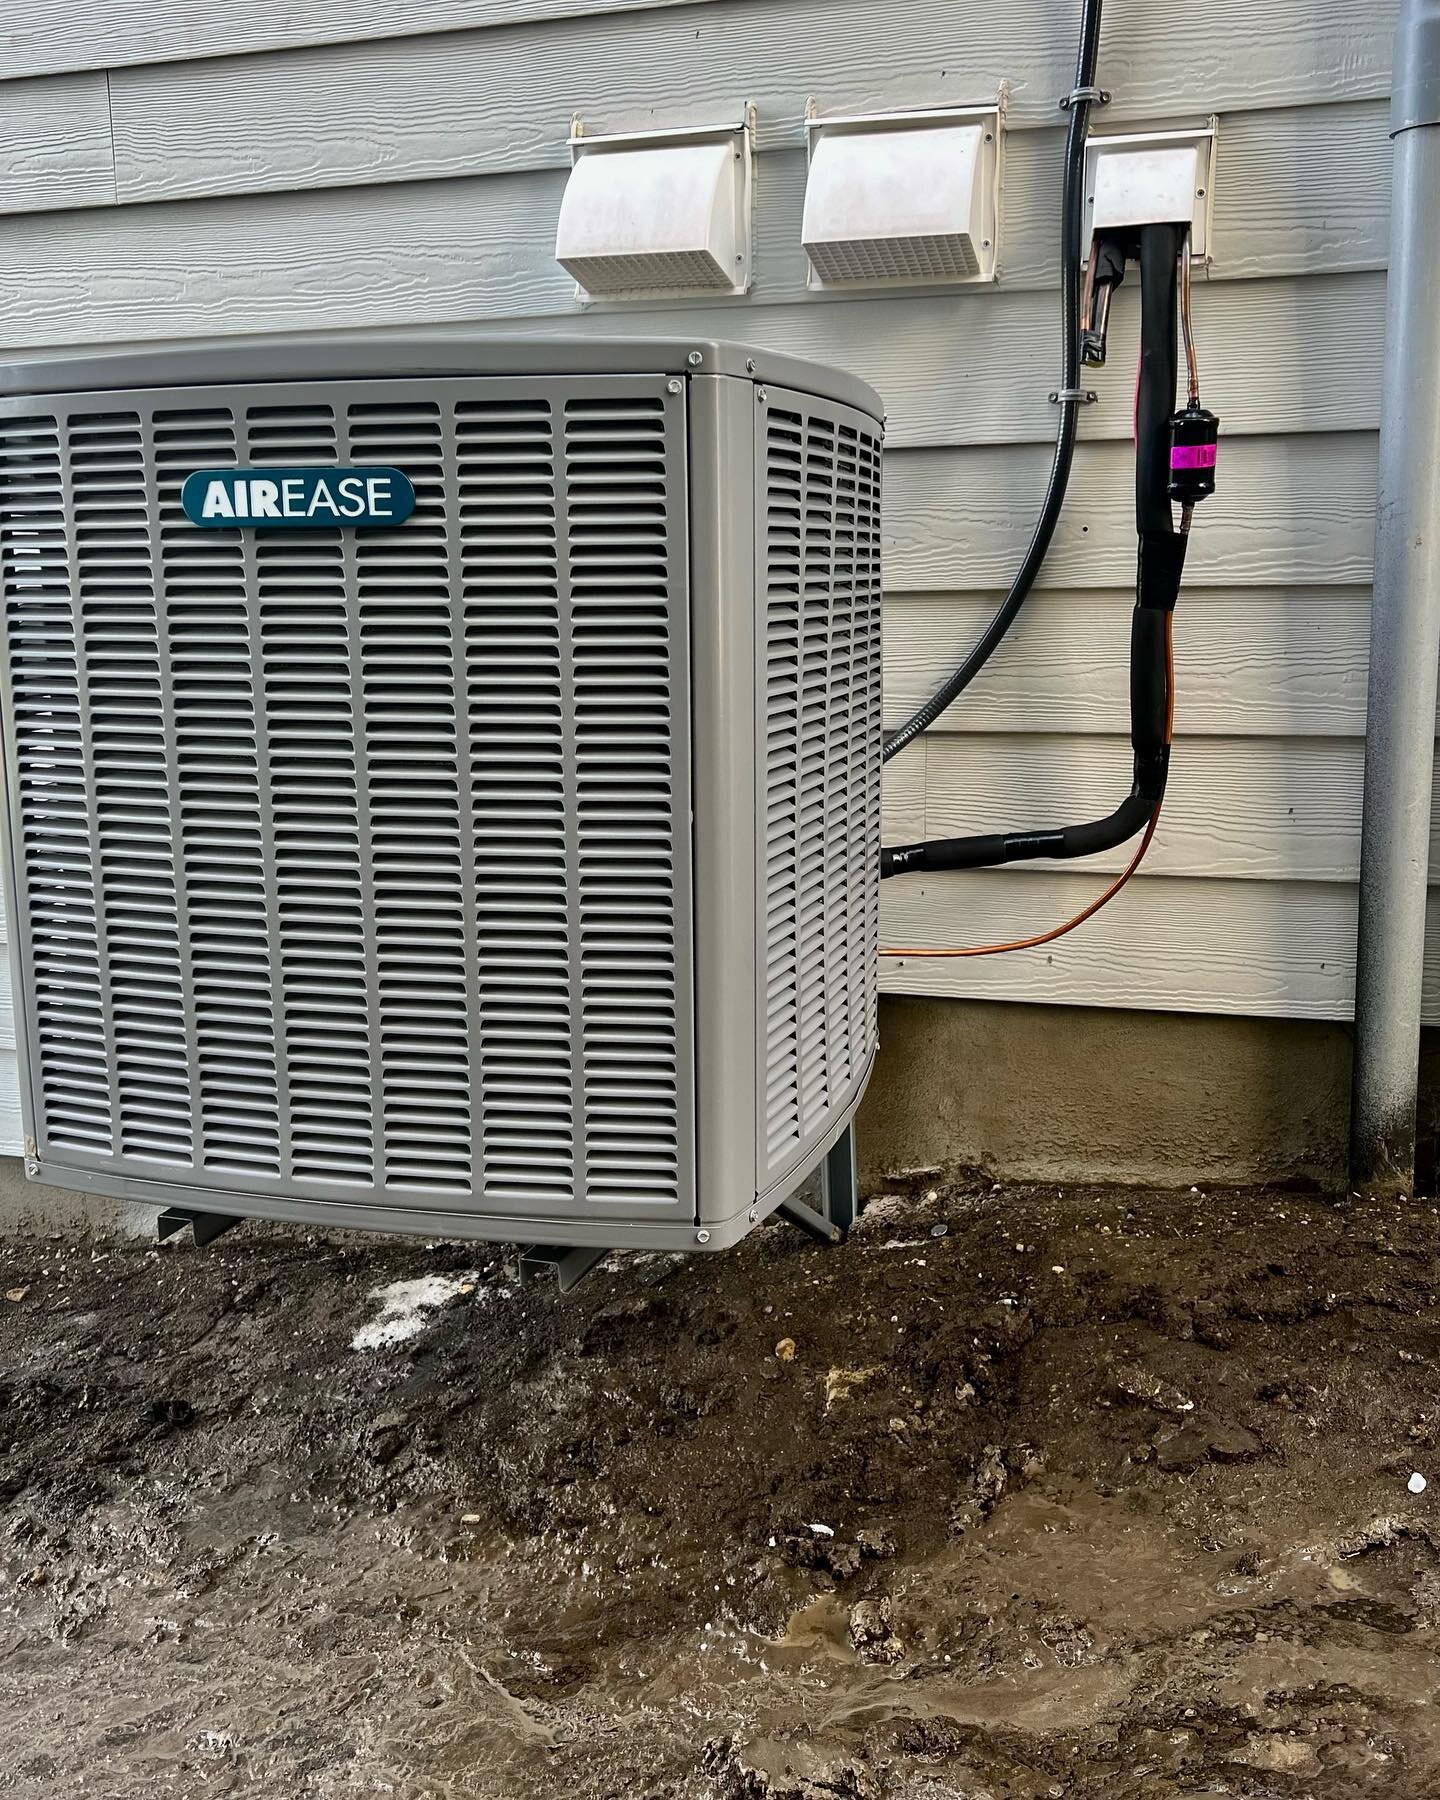 It&rsquo;s almost AC season (we hope 🤞🏻)
&bull;
With Spring &amp; Summer fast approaching, NOW is the best time to get that air conditioner installed that you&rsquo;ve always wanted.
&bull;
Pictured above is one our recently completed AC jobs, done